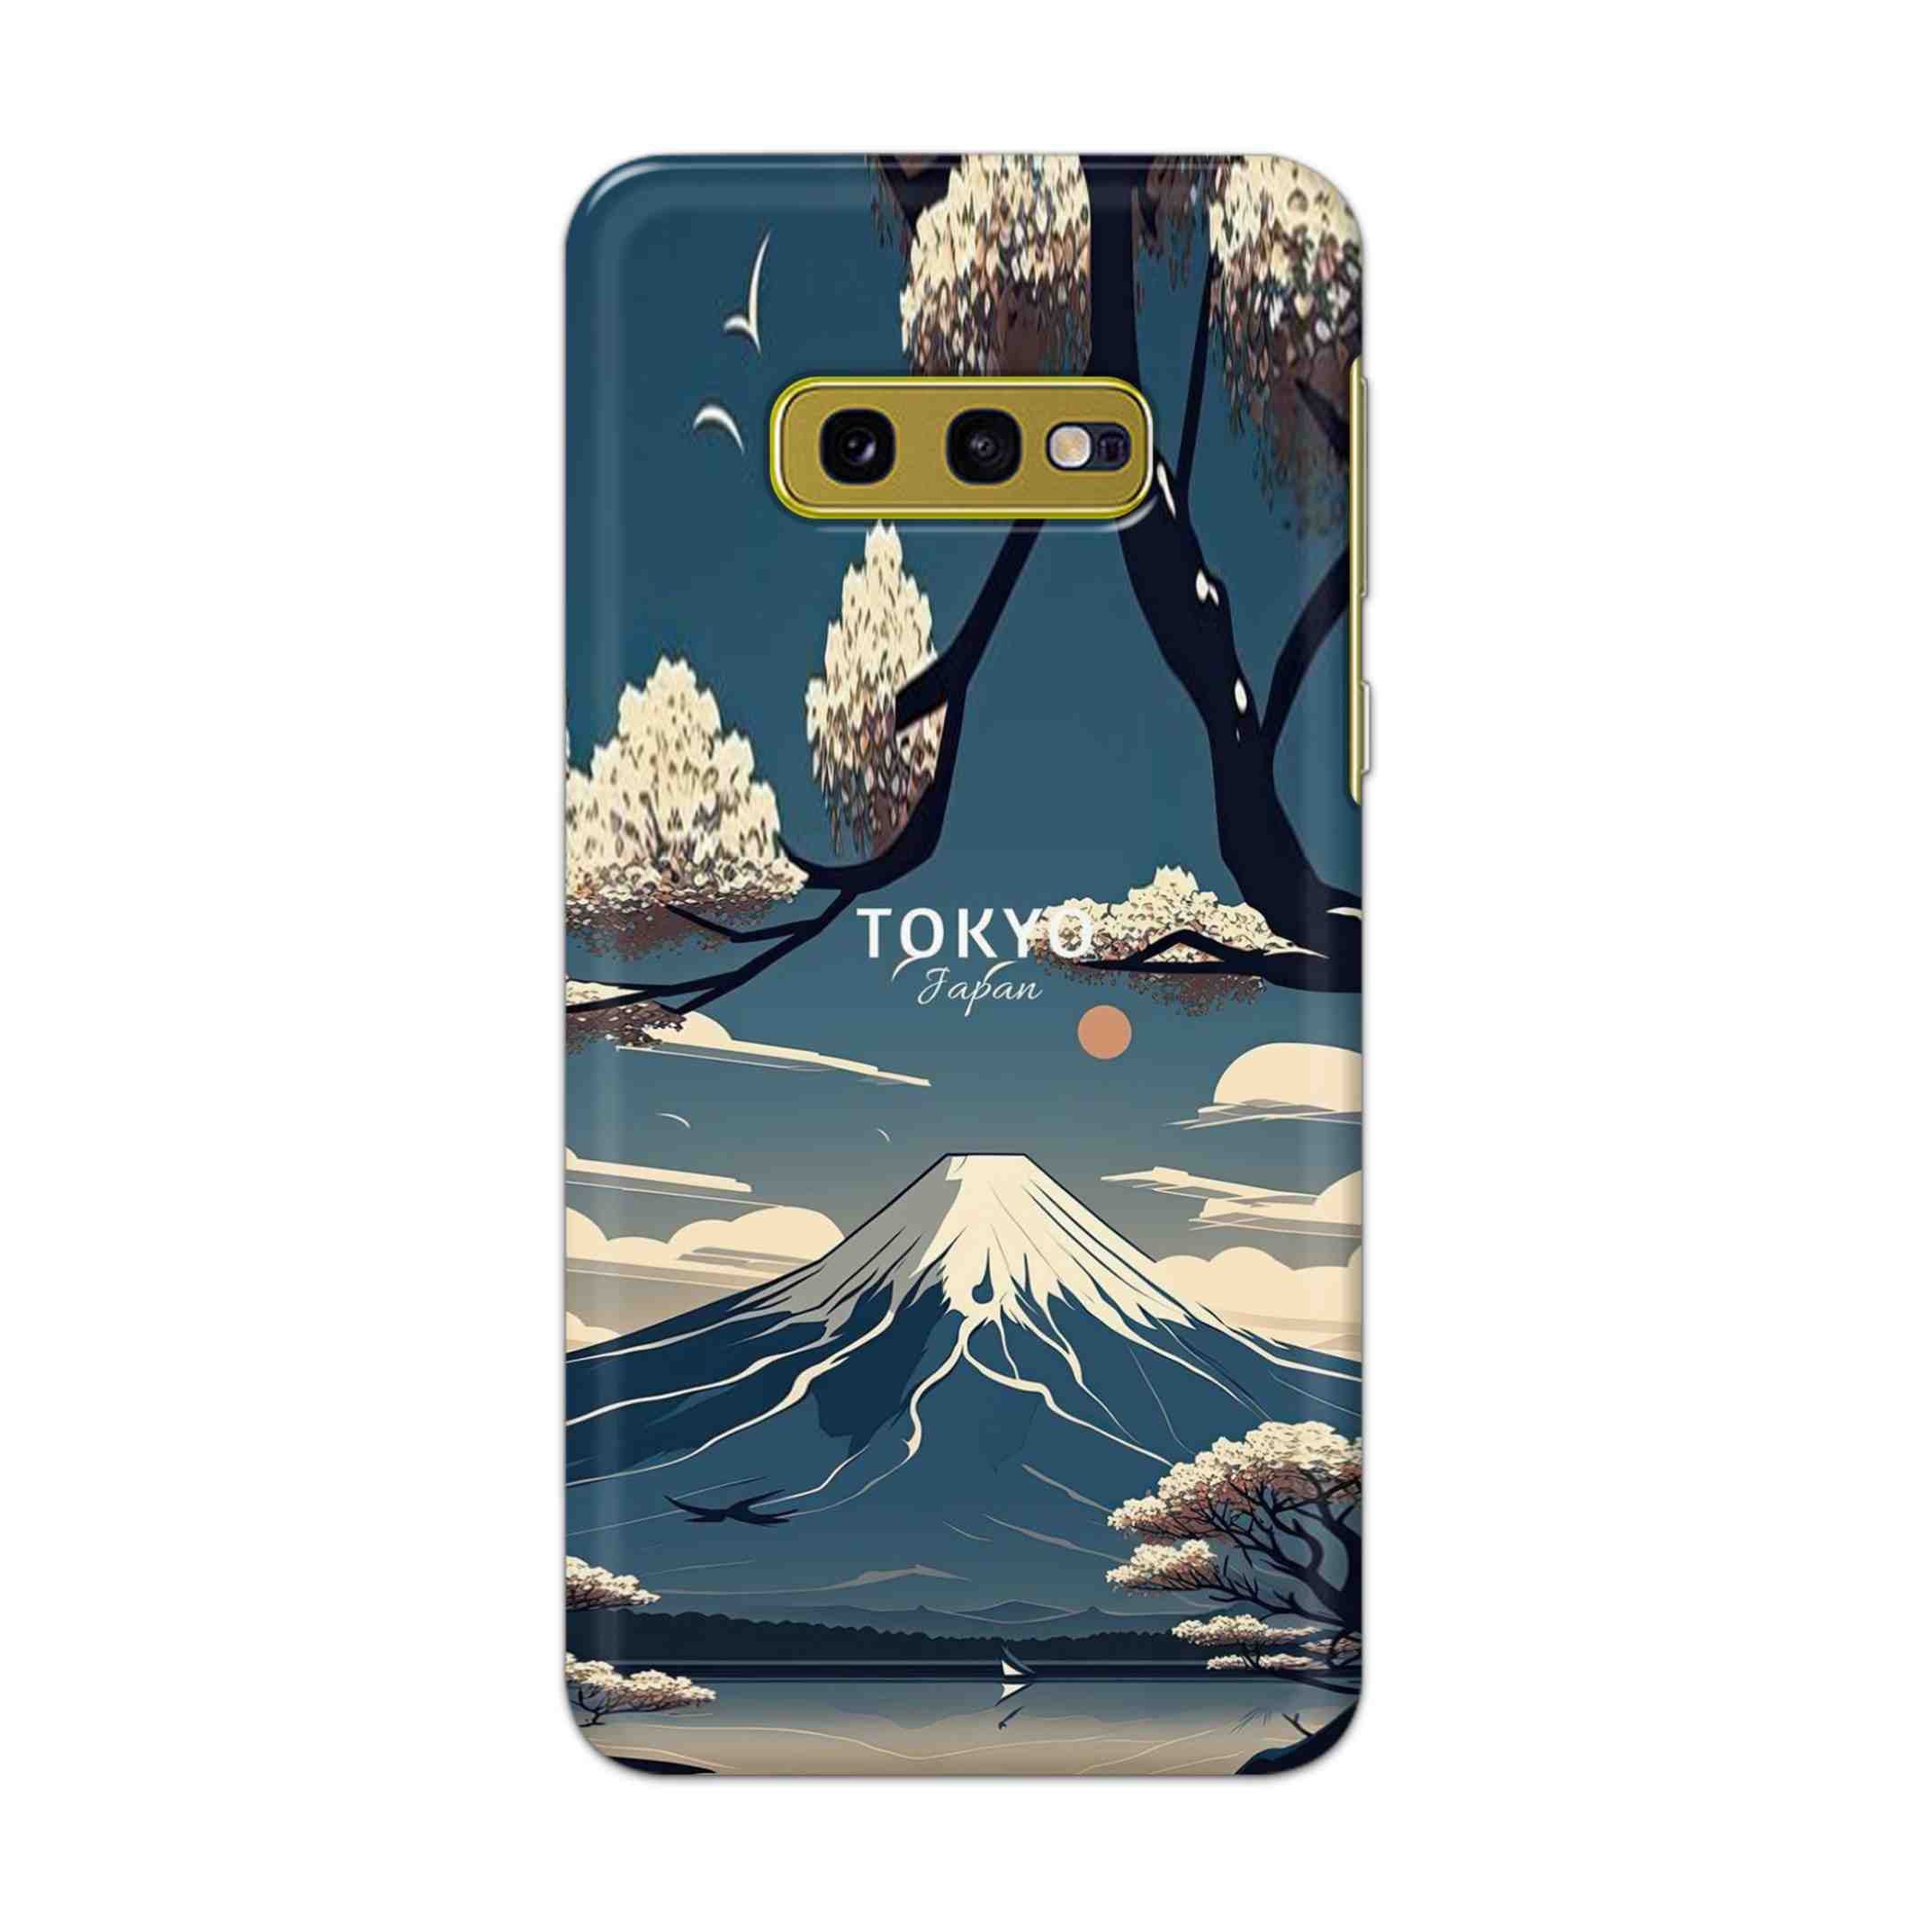 Buy Tokyo Hard Back Mobile Phone Case Cover For Samsung Galaxy S10e Online